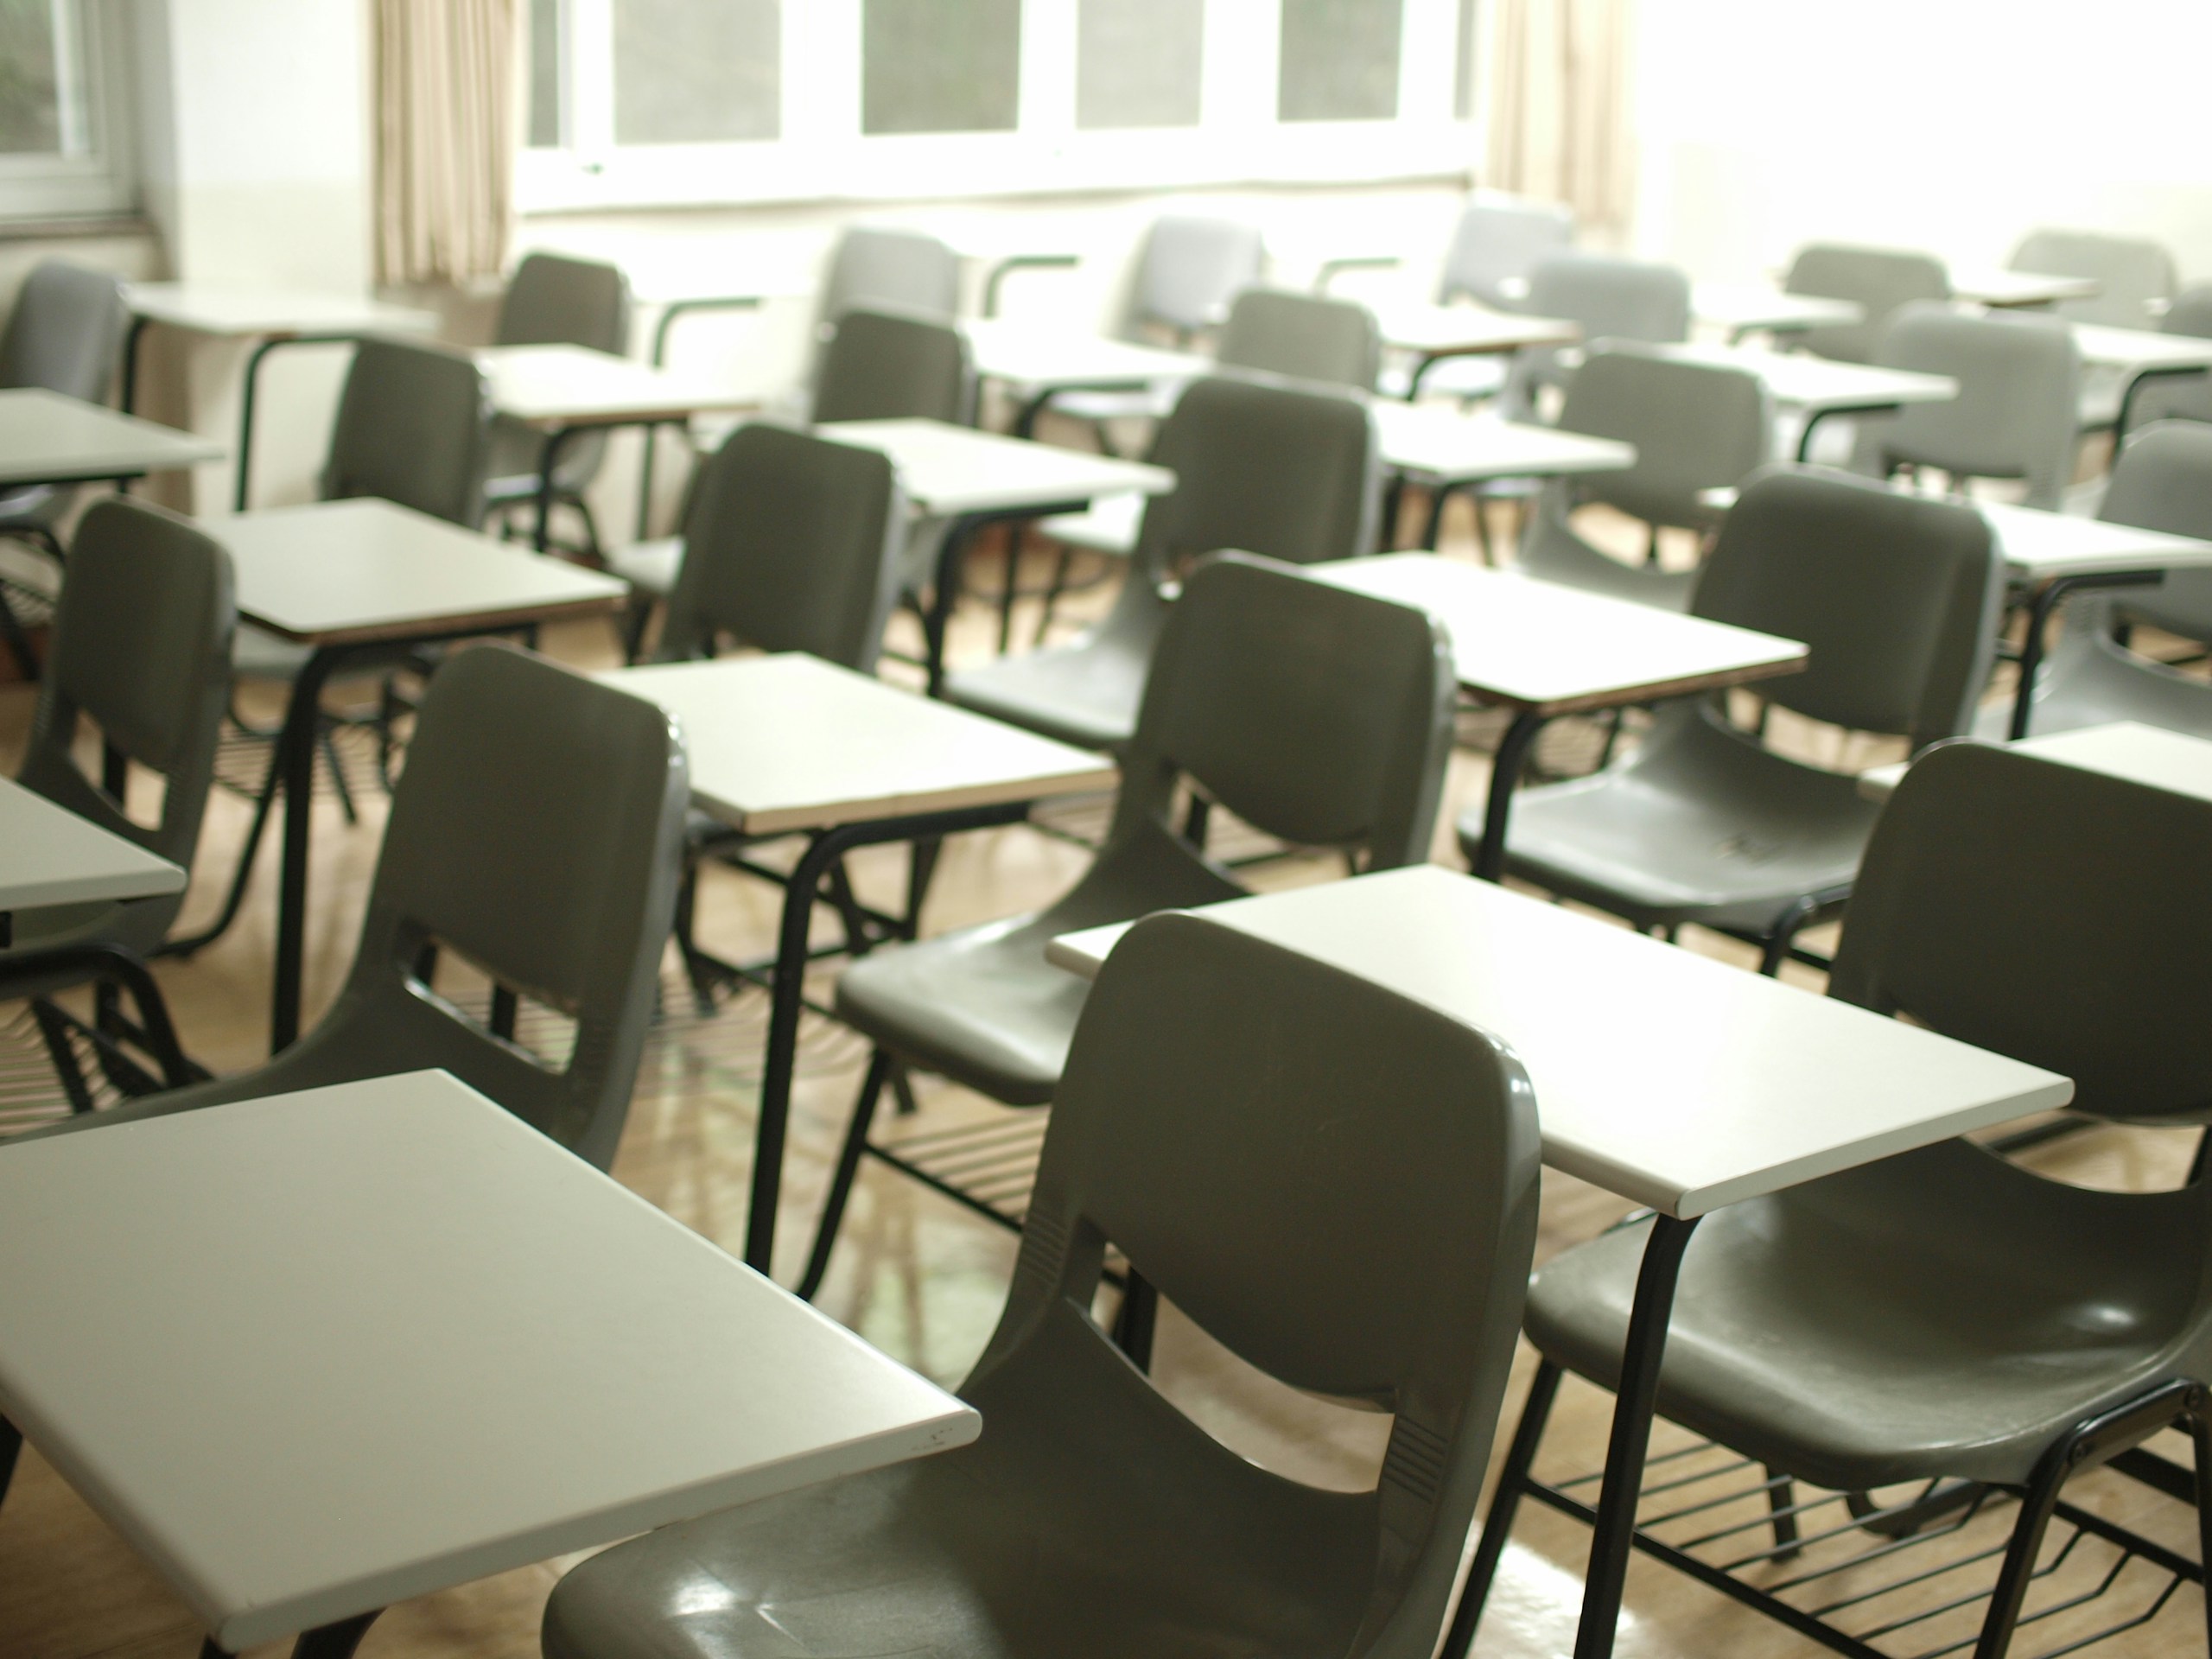  a photo of an empty classroom with desks and chairs